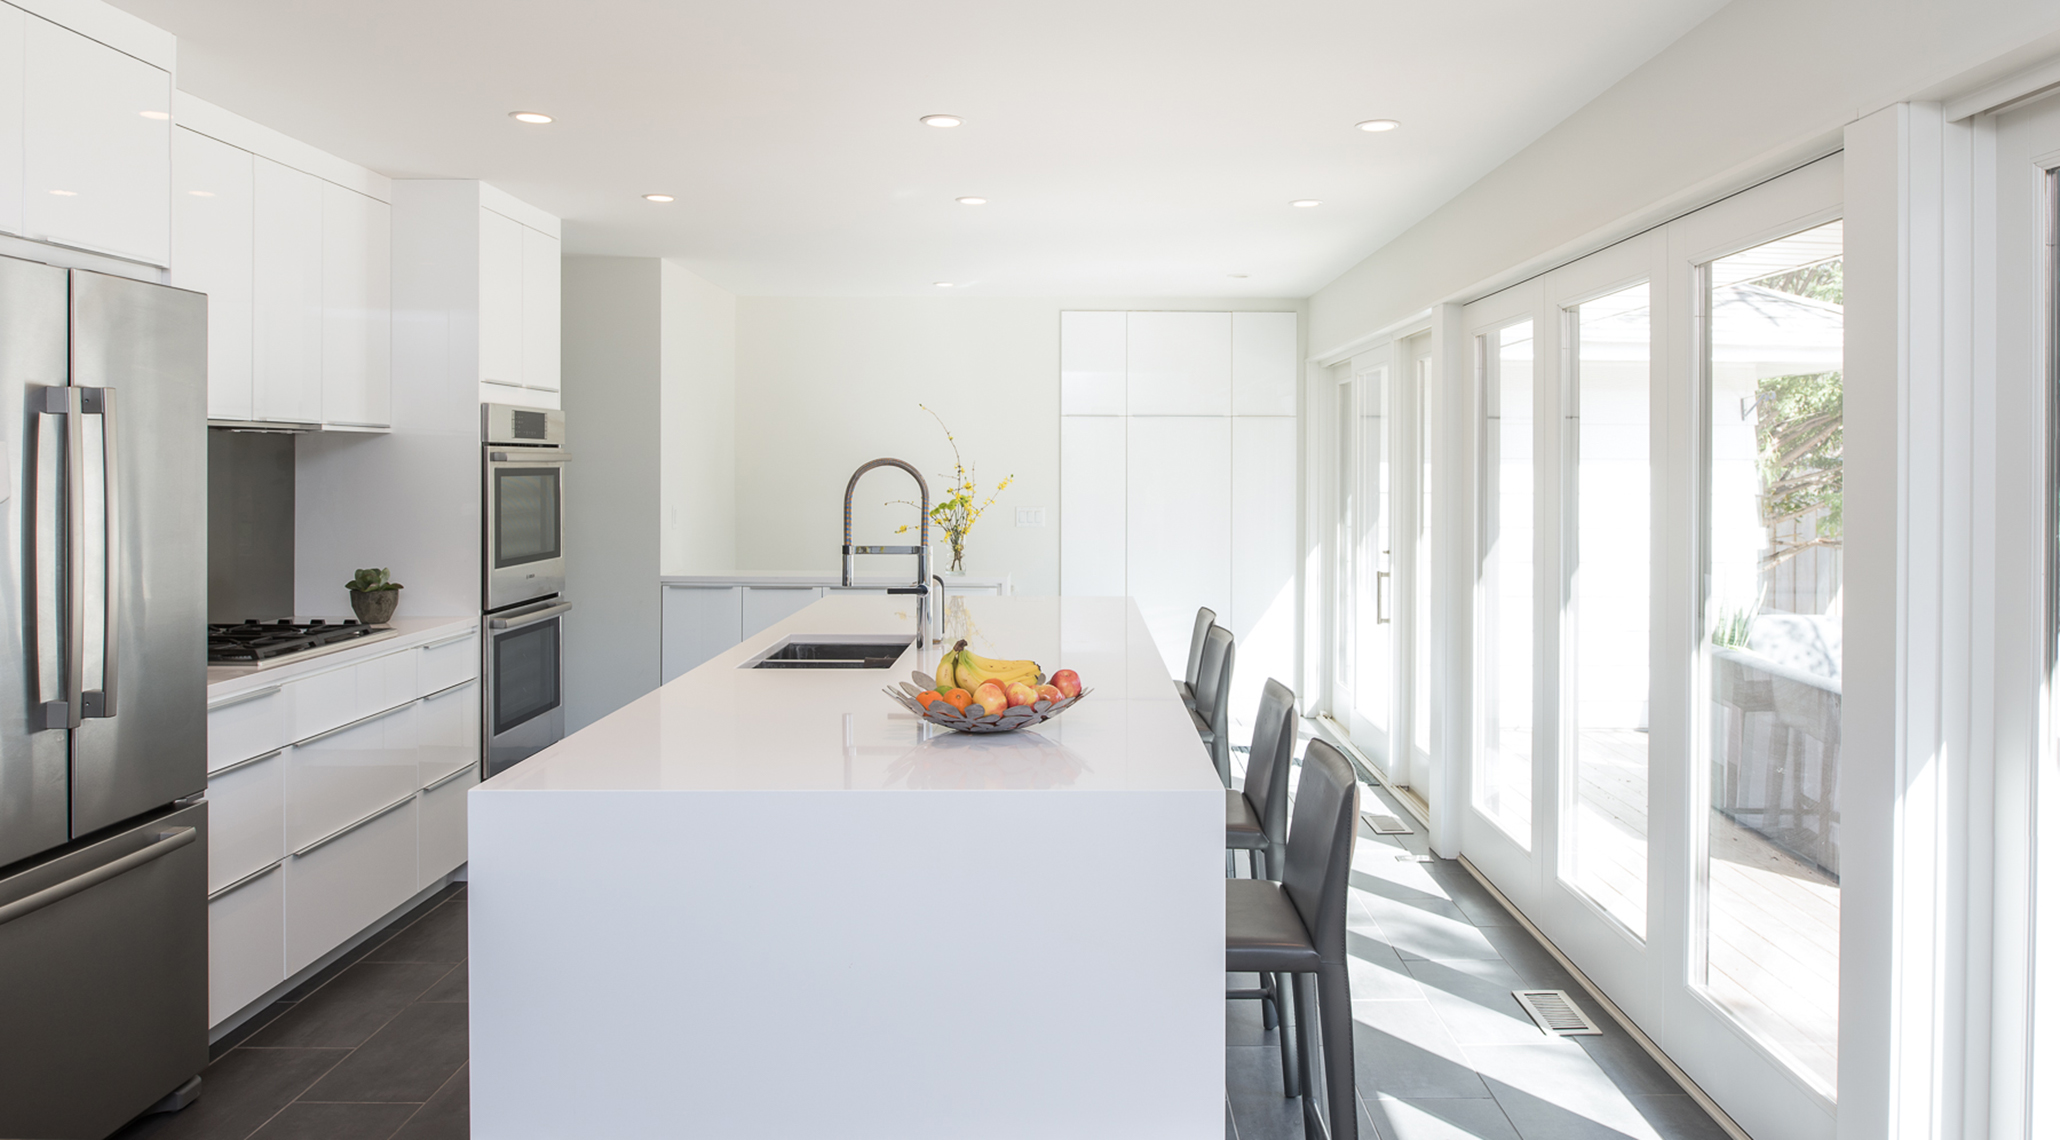 Modern white kitchen renovation in St. Paul, Minnesota by Christian Dean Architecture